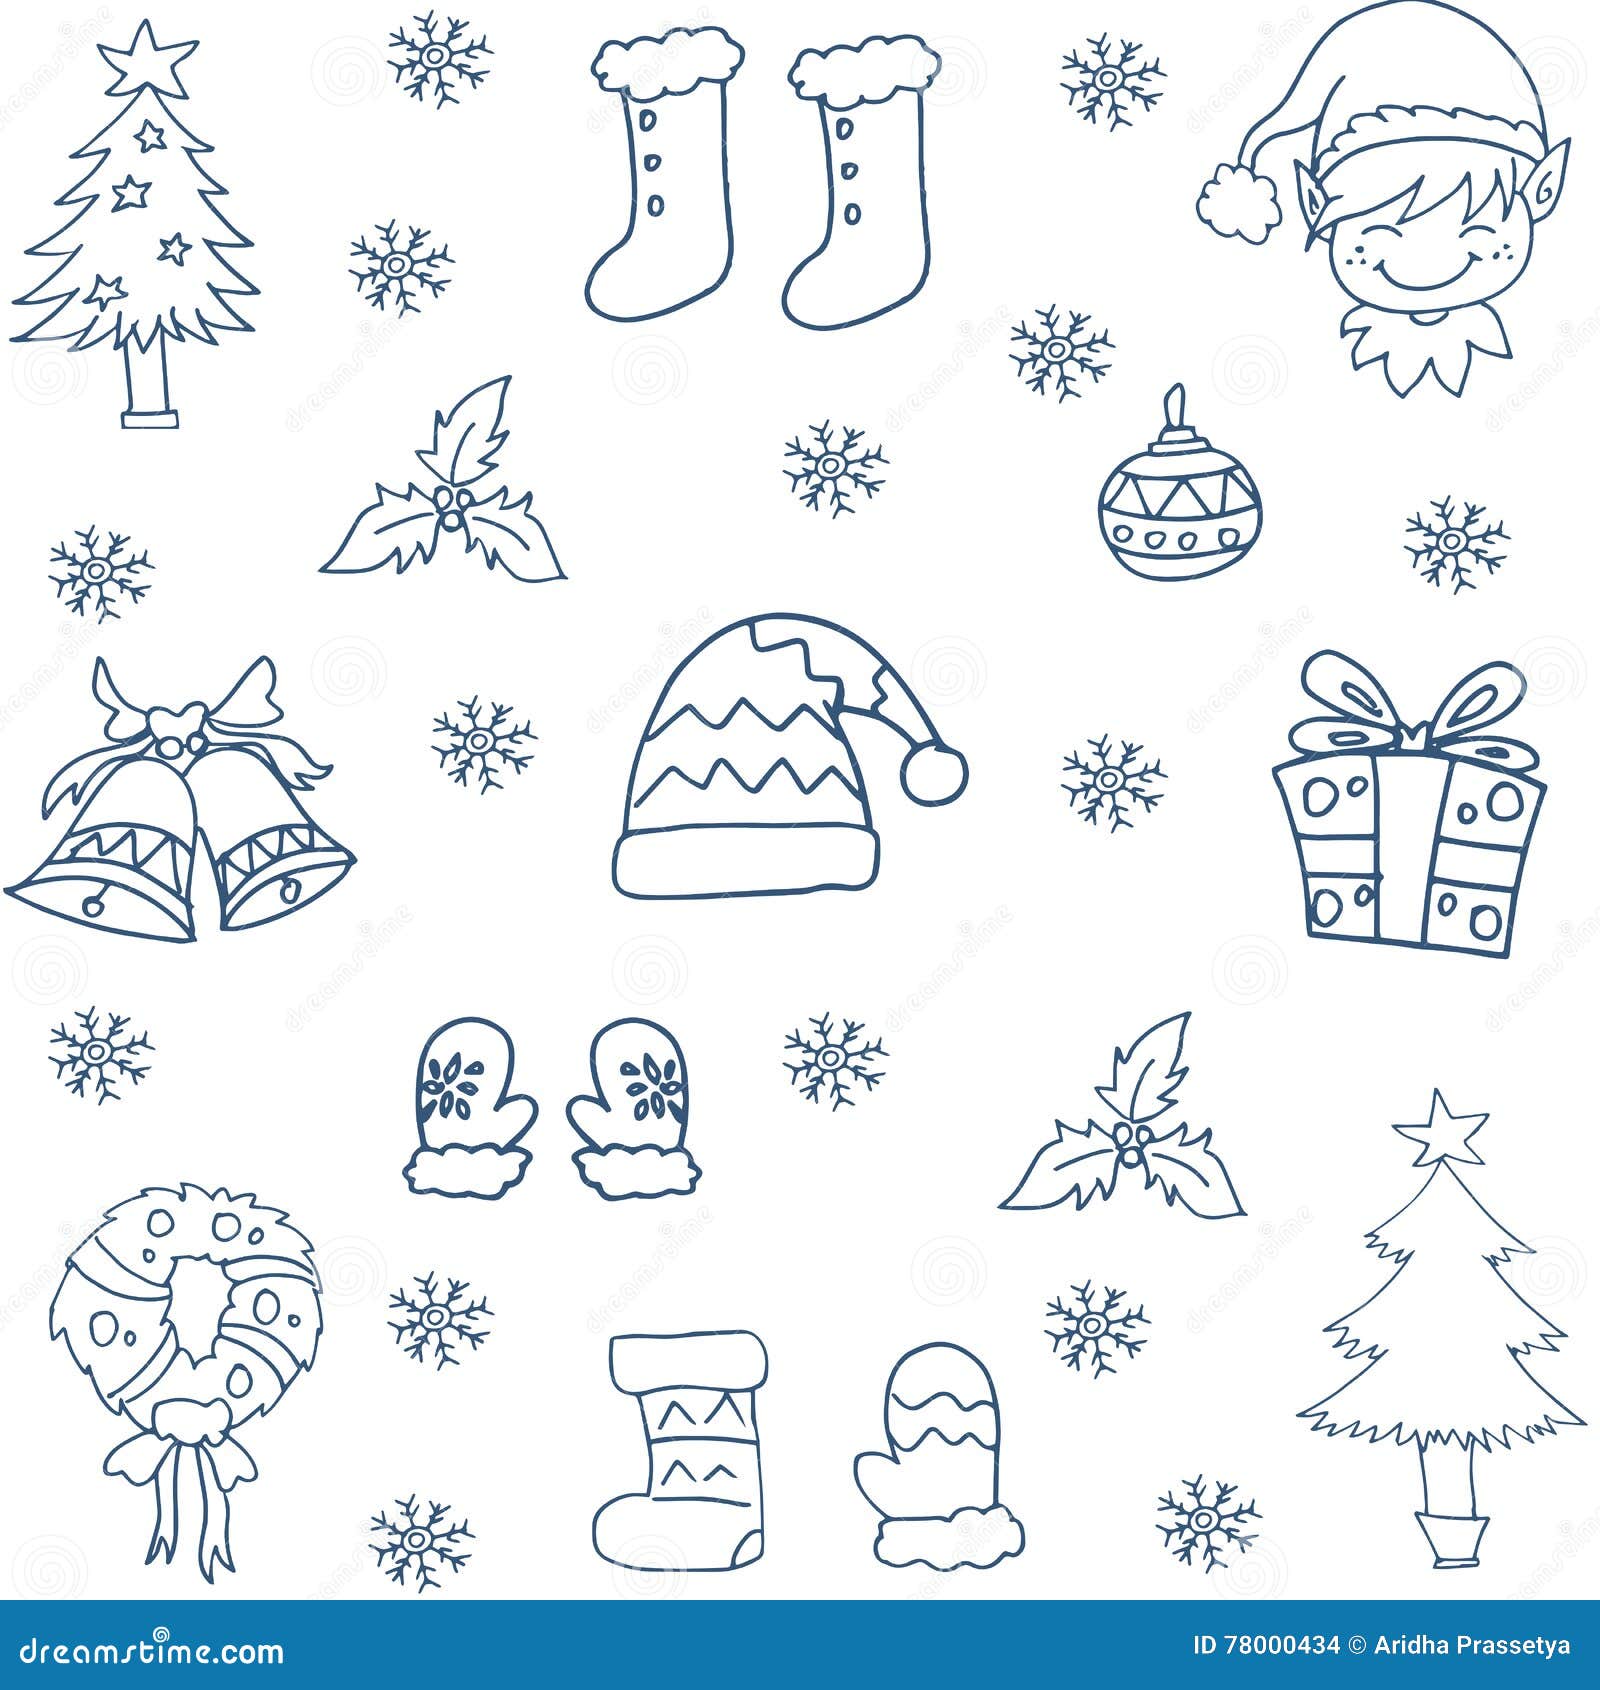 Winter Doodle Set with Hand Draw Stock Vector - Illustration of vector ...